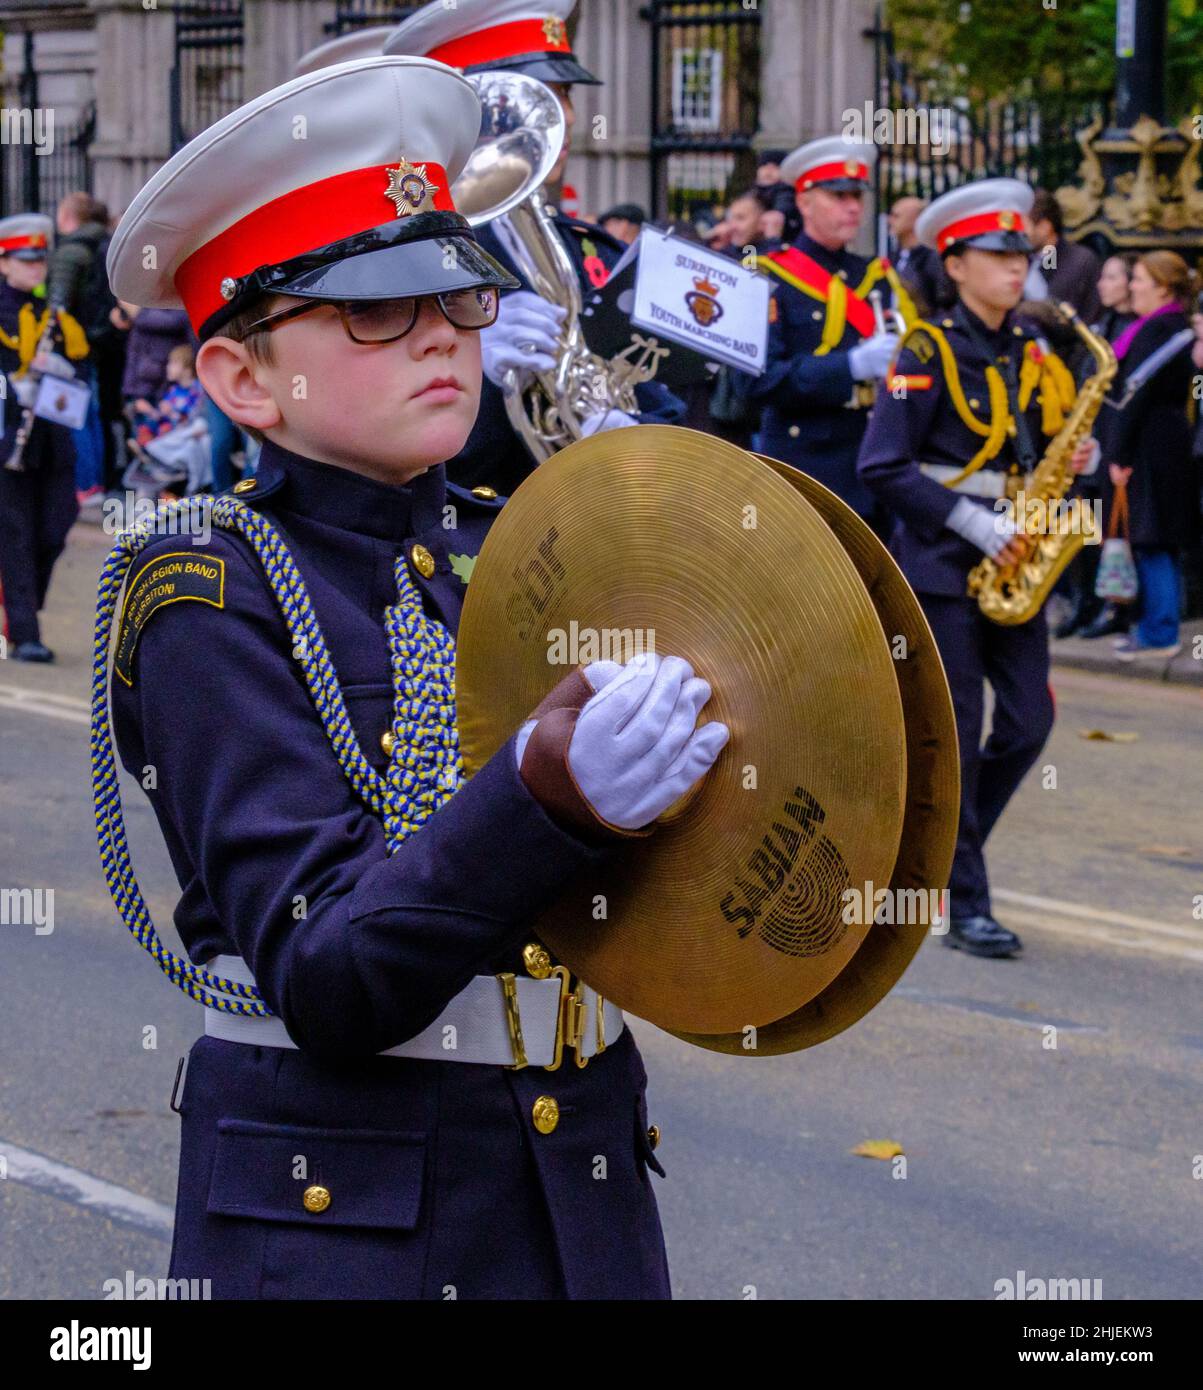 Young boy plays cymbals marching with the Surbiton Rbl Youth Marching Band at the Lord Mayor’s Show 2021, Victoria Embankment, London. Stock Photo